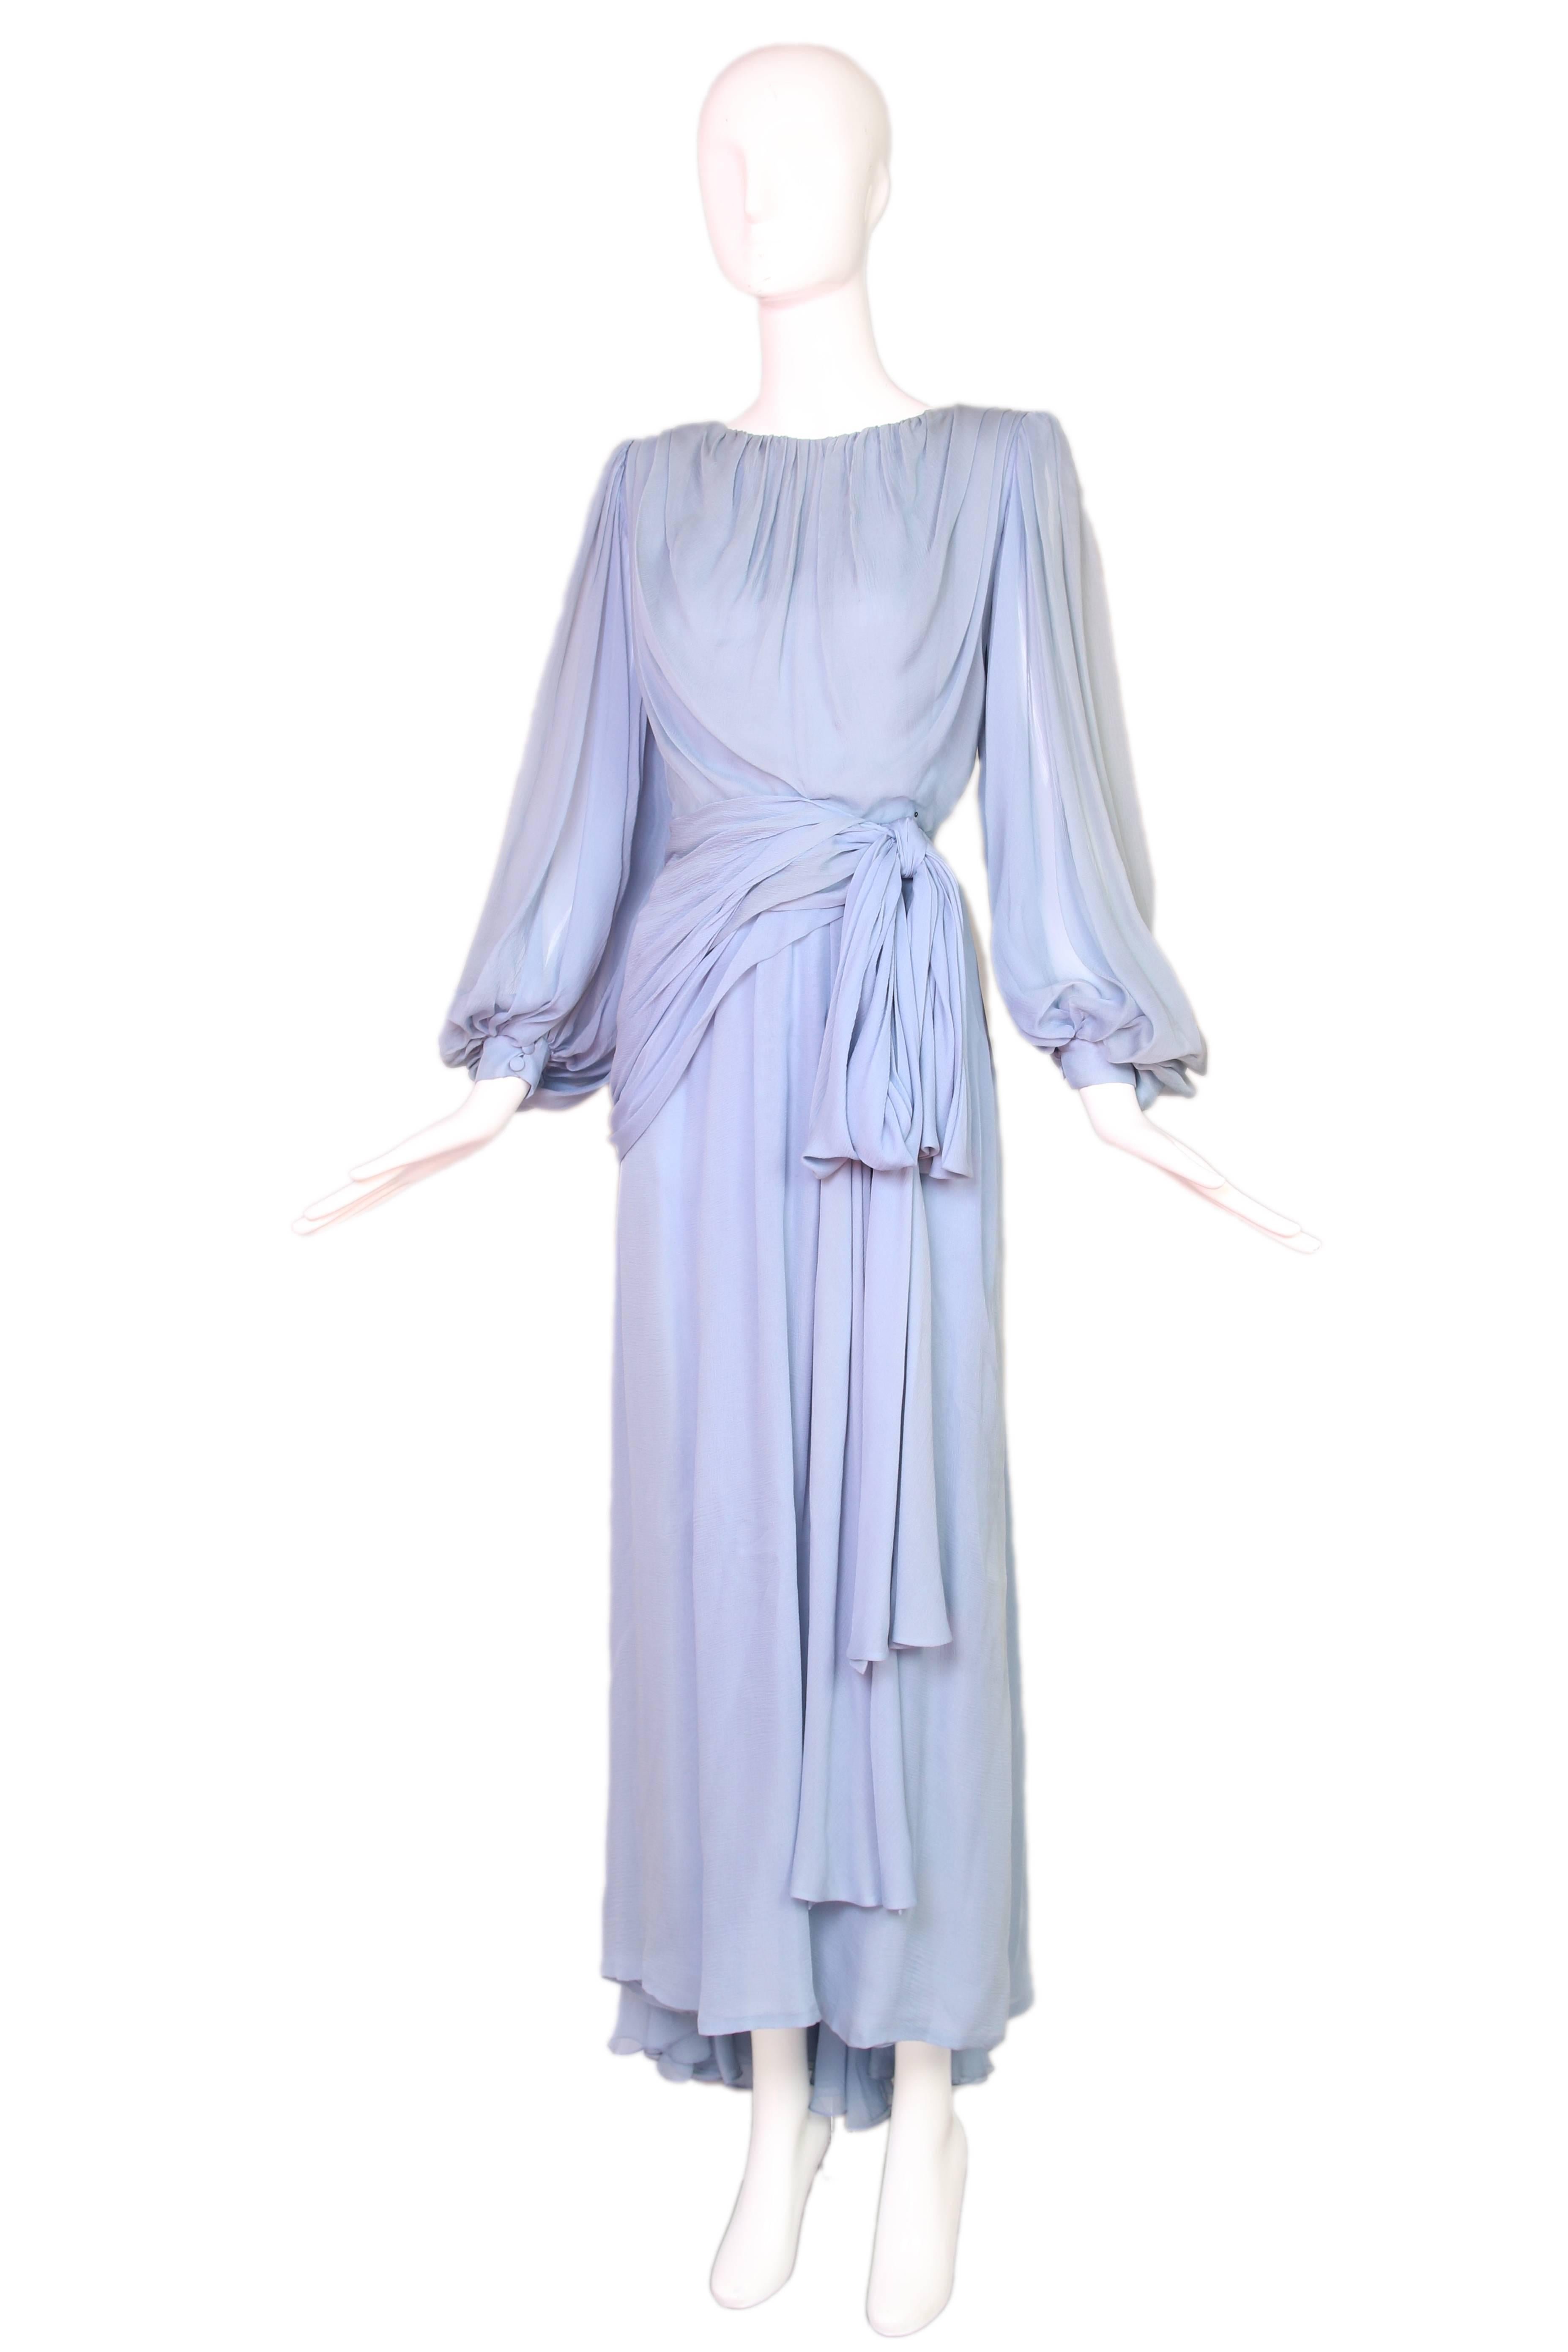 1987 A/H Yves Saint Laurent haute couture periwinkle blue silk chiffon evening gown with meticulous pleating, multiple chiffon layers, bishop sleeves and an attached sash/belt. Included is the original runway photo - see photos. In very good